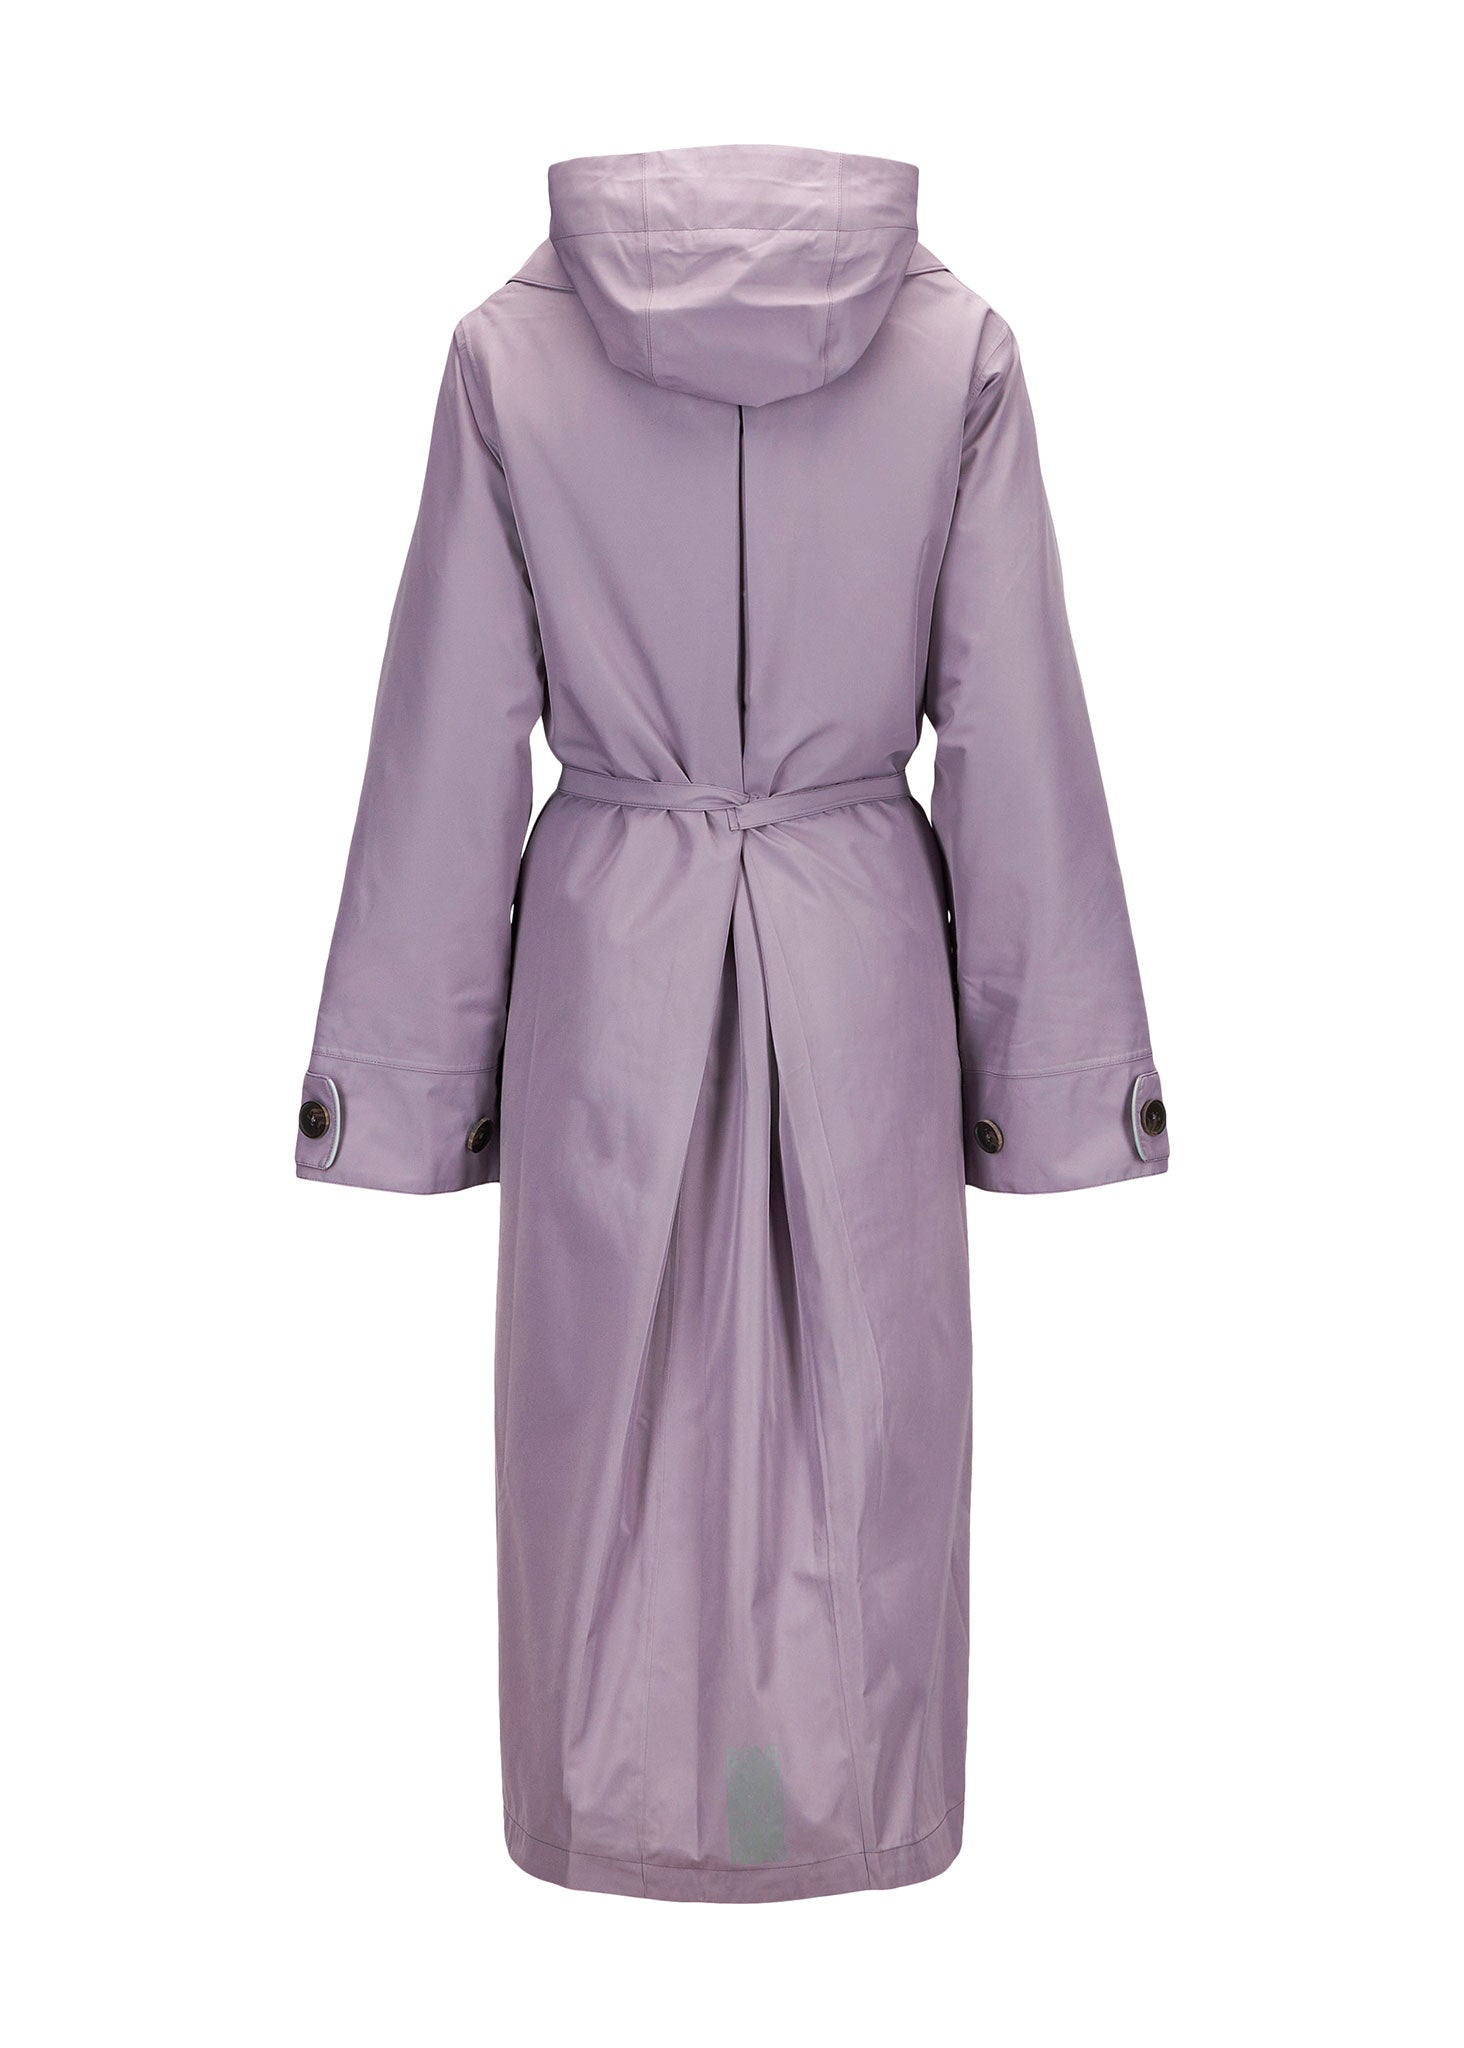 BRGN by Lunde & Gaundal Cloudy Coat Limited edition Coats 700 Lilac